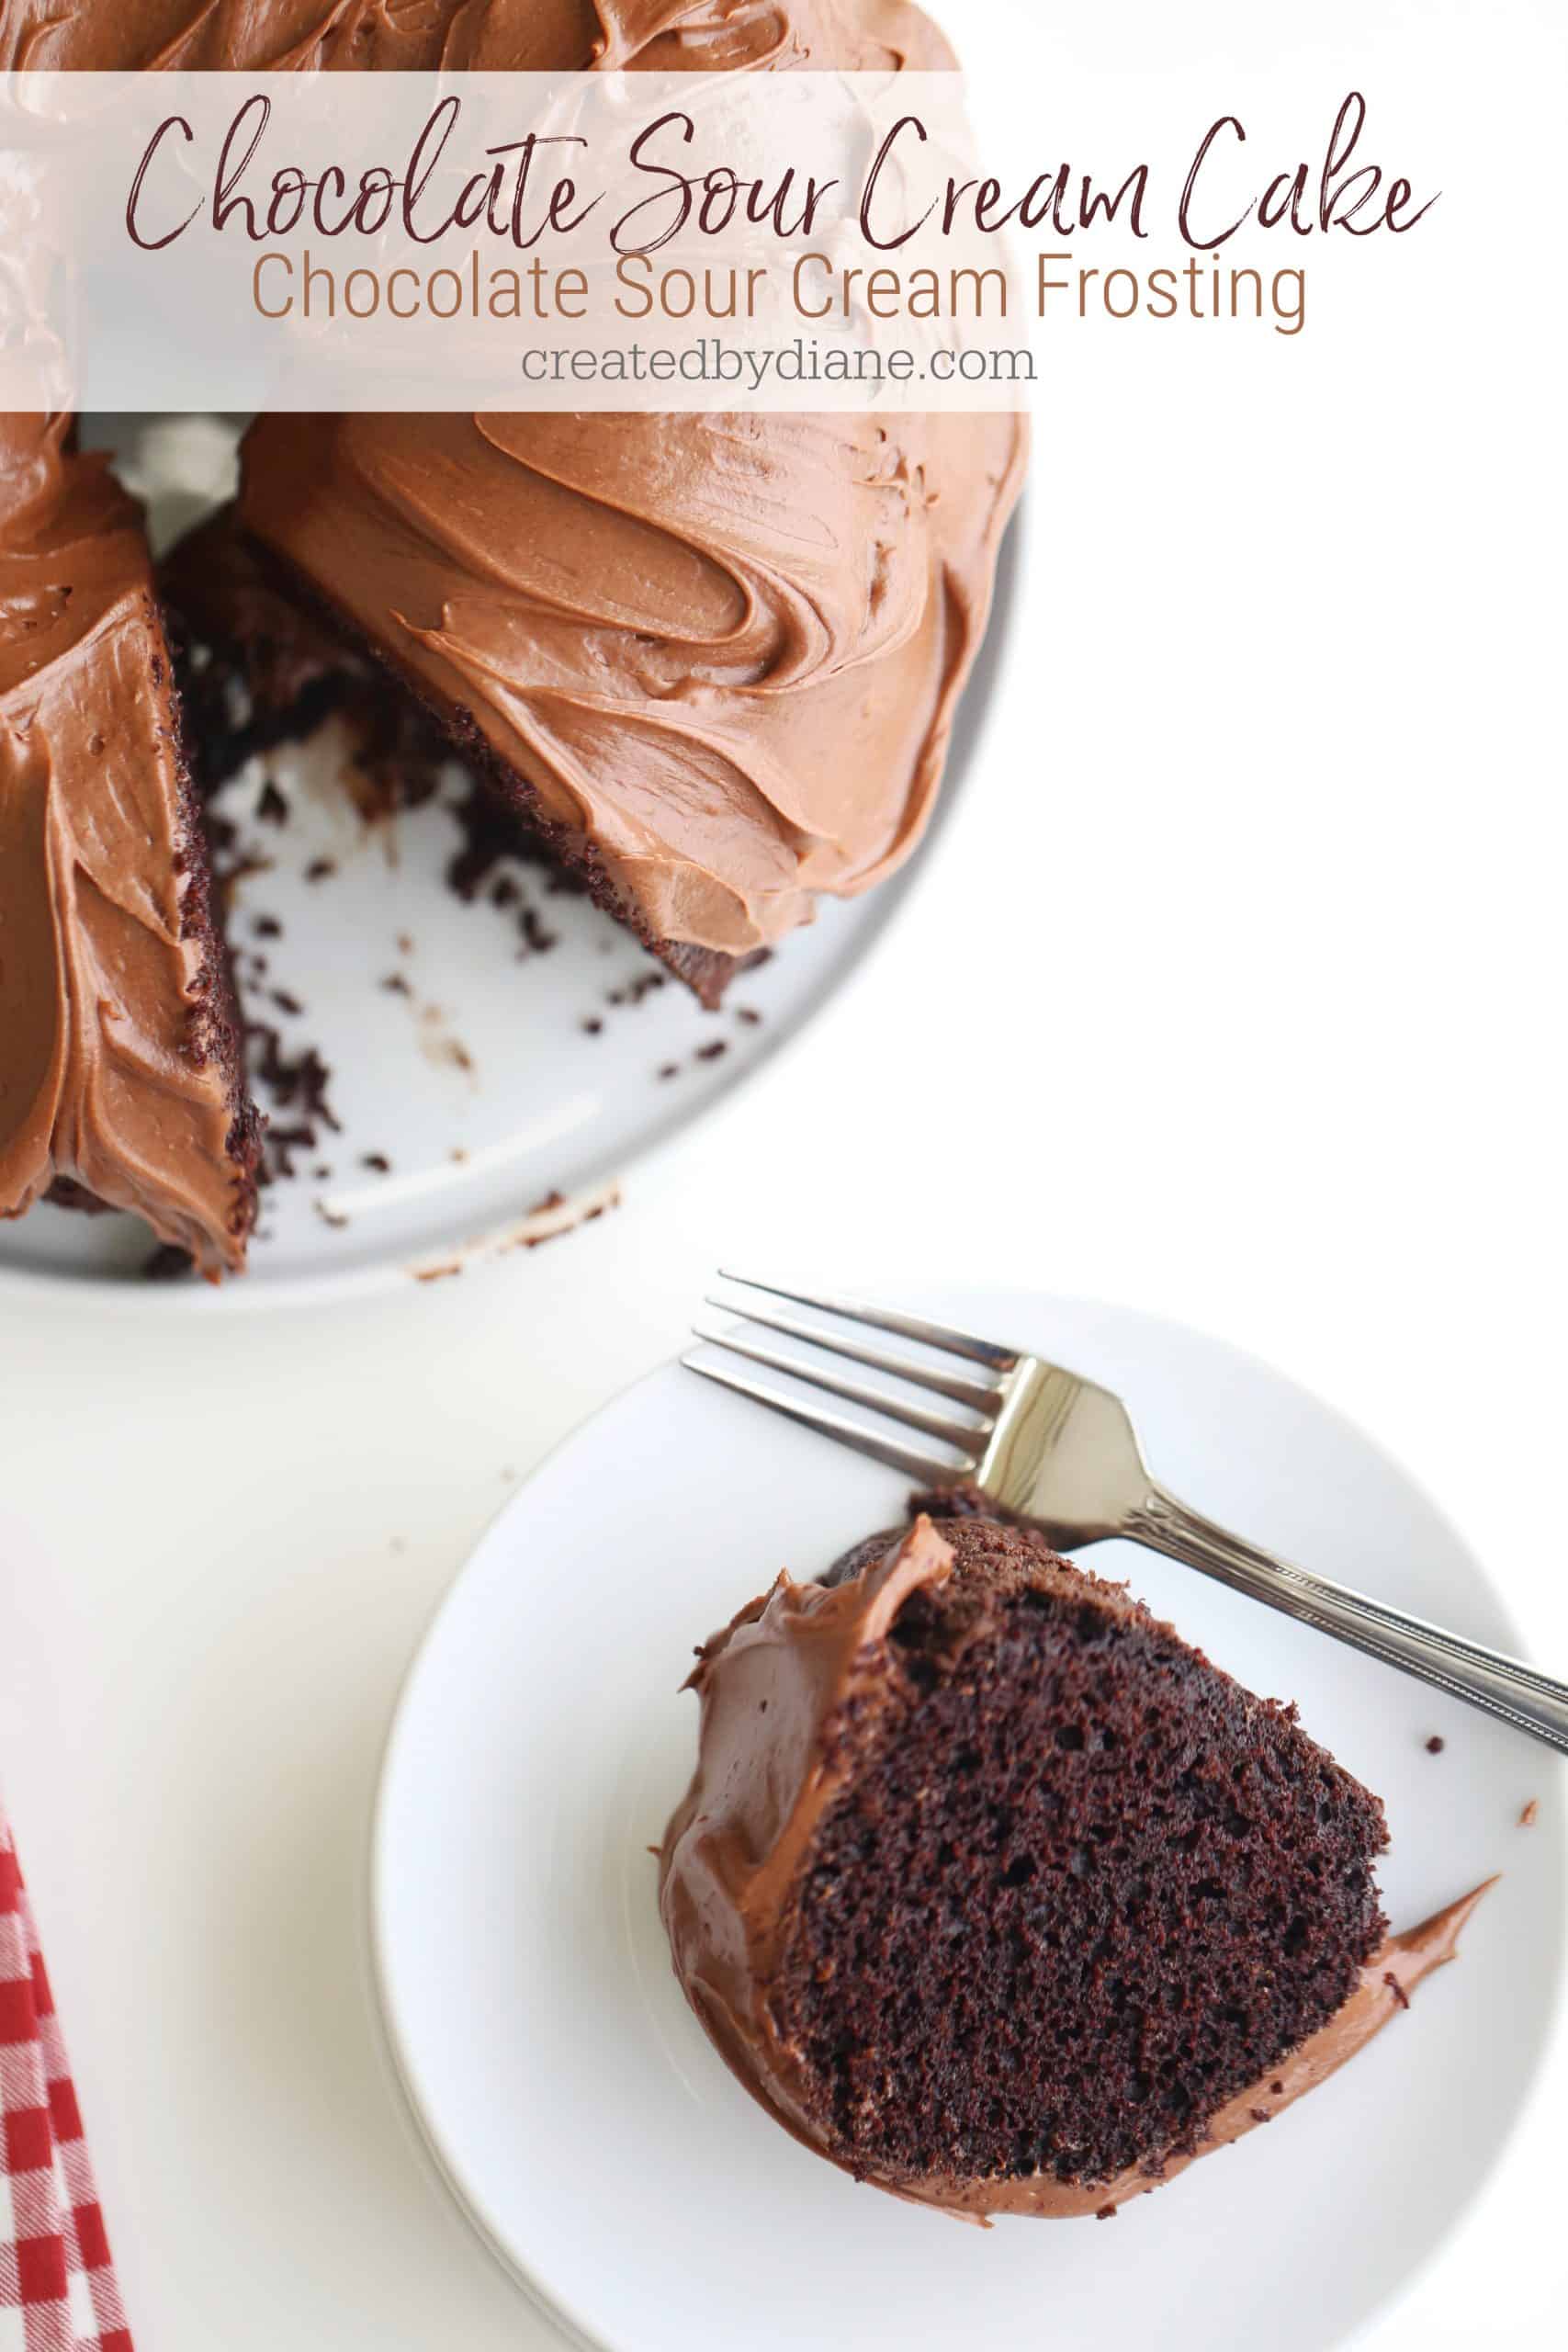 Chocolate Sour Cream Cake with Chocolate Sour Cream Frosting